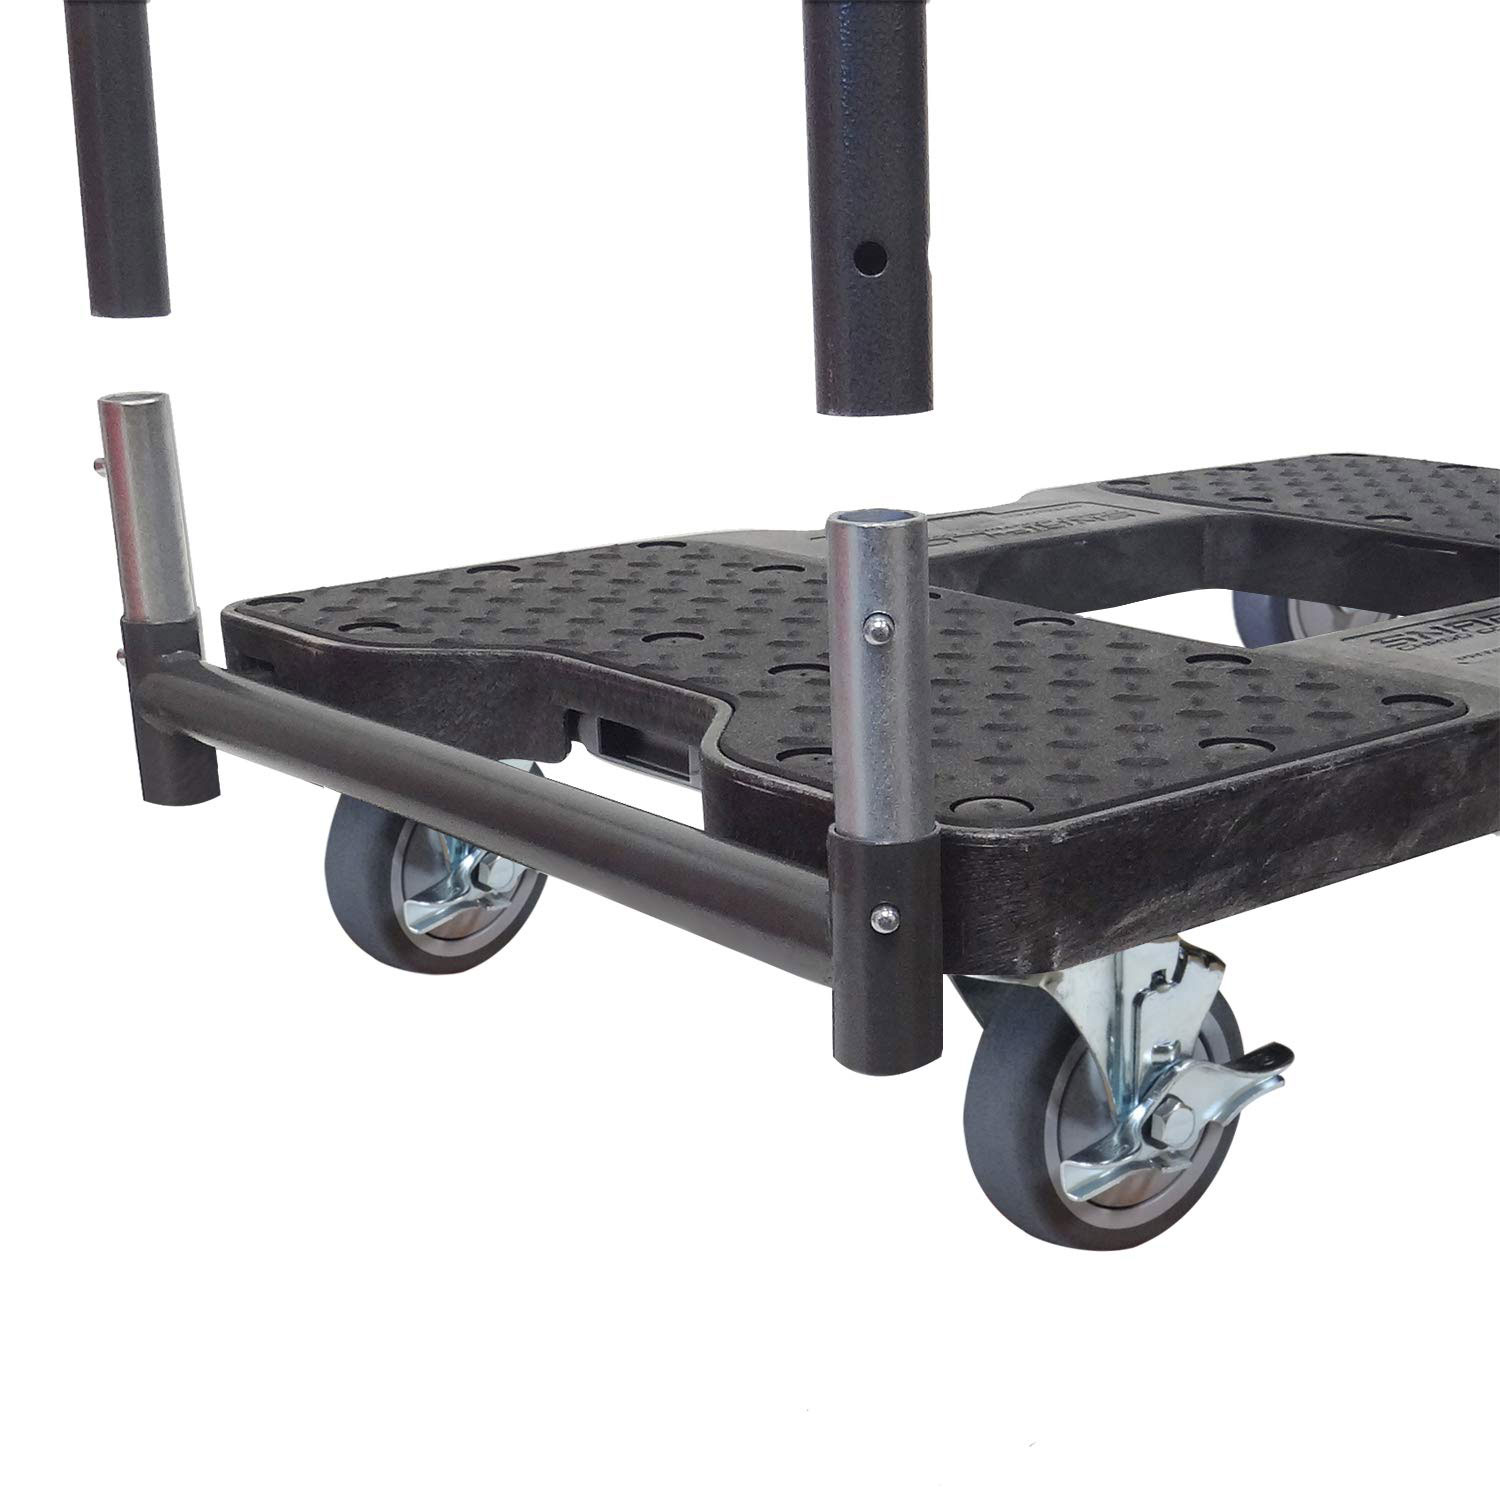 Snap Loc Professional Panel Moving Platform Dolly Cart with 1200 Pound Capacity - image 2 of 7